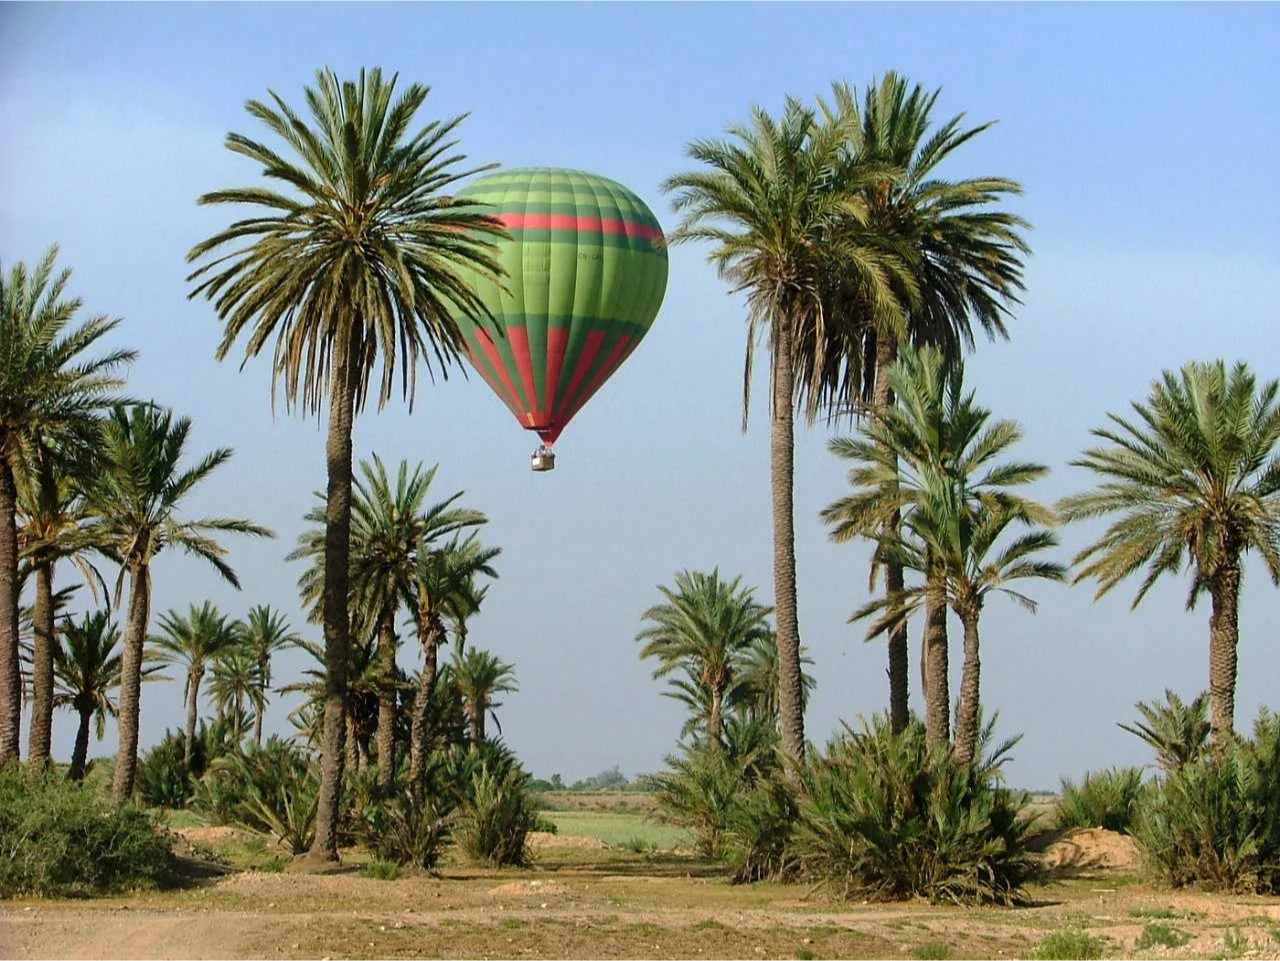 BEST EXPERIENCE OF HOT AIR BALLOON IN MARRAKESH